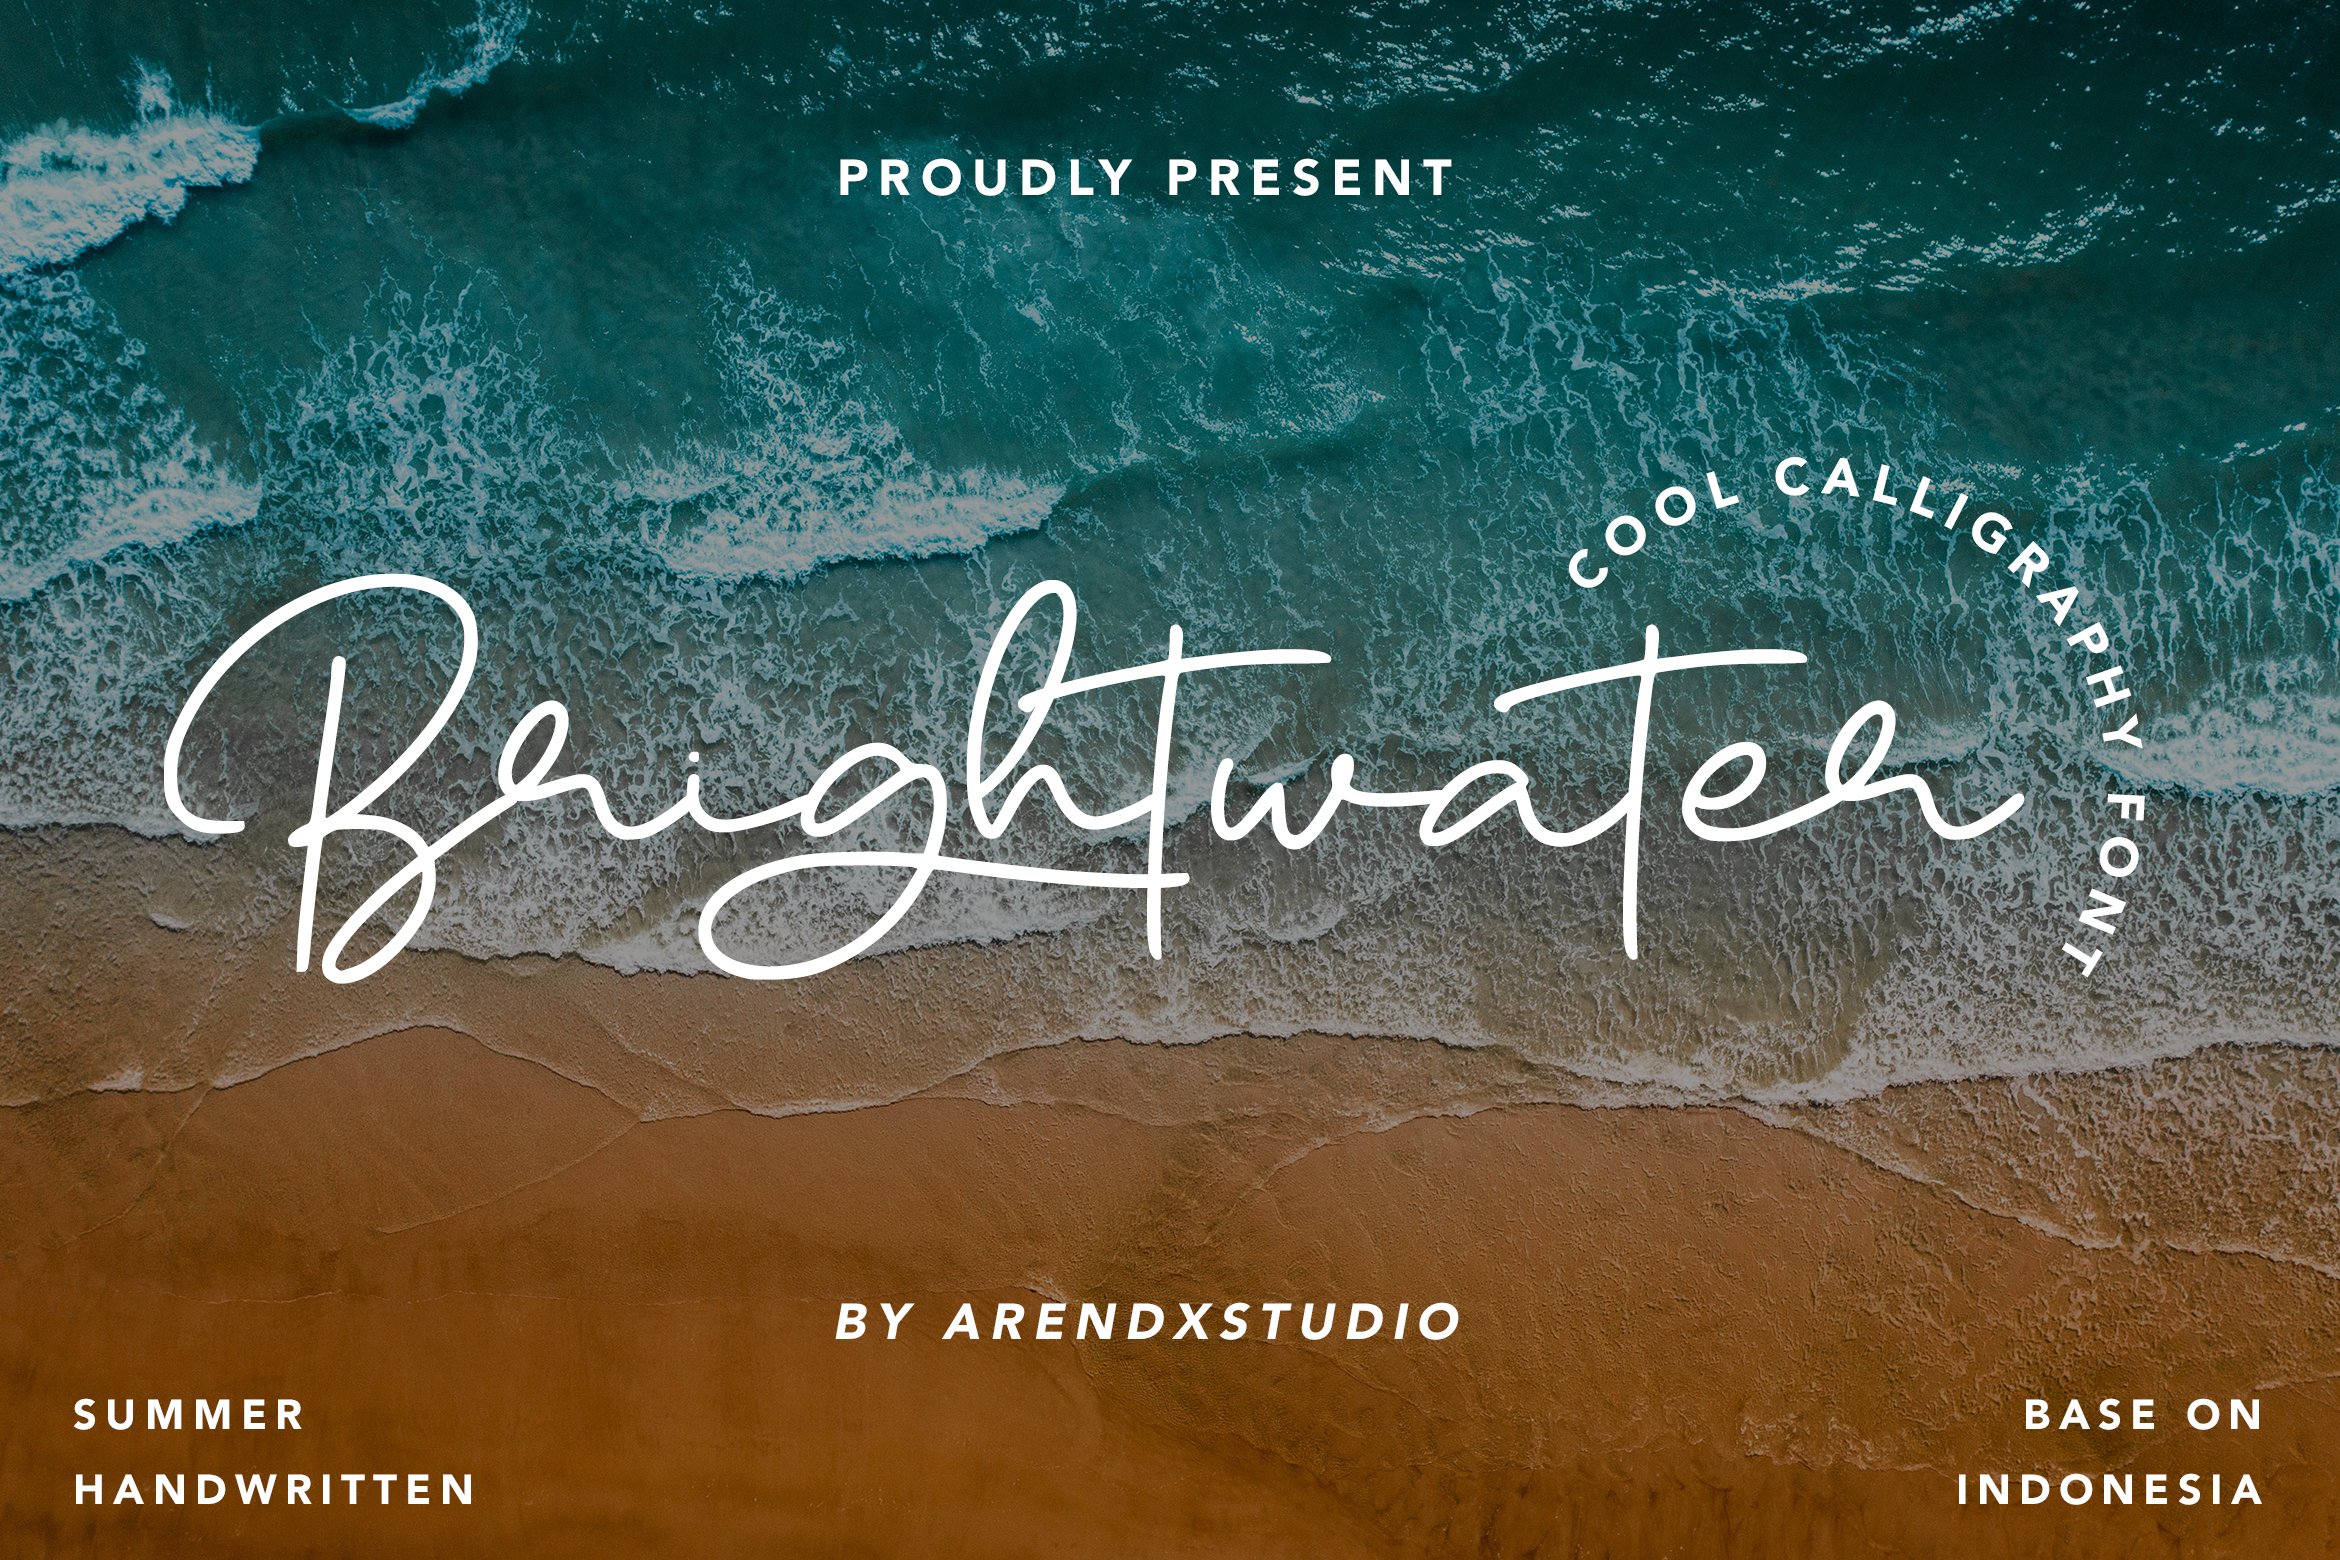 Brightwater - Cool Calligraphy Font cover image.